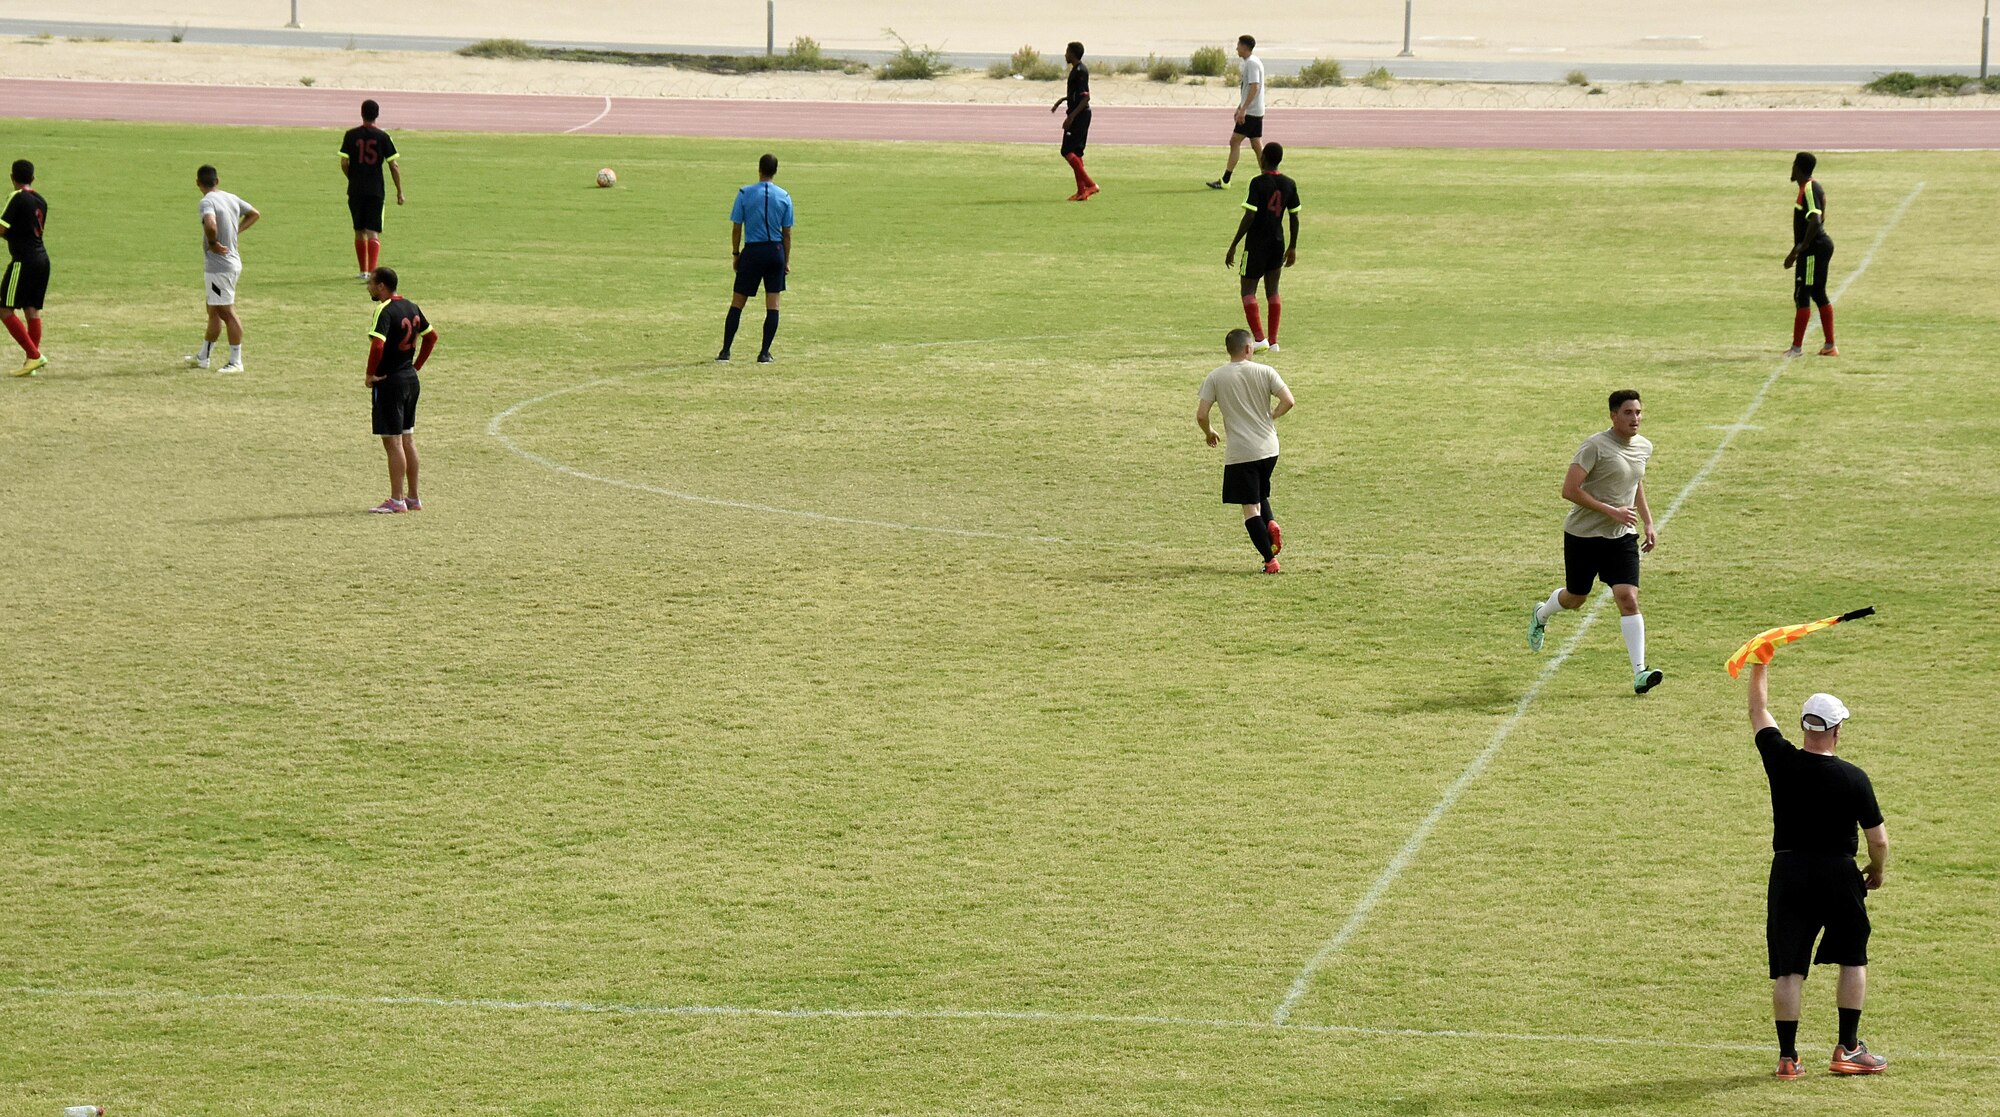 U.S. Air Force Airmen with the 379th Expeditionary Security Forces Squadron play soccer with Qatar Emiri Air Force Security Forces members at Al Udeid Air Base, Qatar, March 23, 2017. The Airmen participated in a friendly game of soccer held to give members a chance to interact with their host nation partners. (U.S. Air Force photo by Senior Airman Cynthia A. Innocenti)